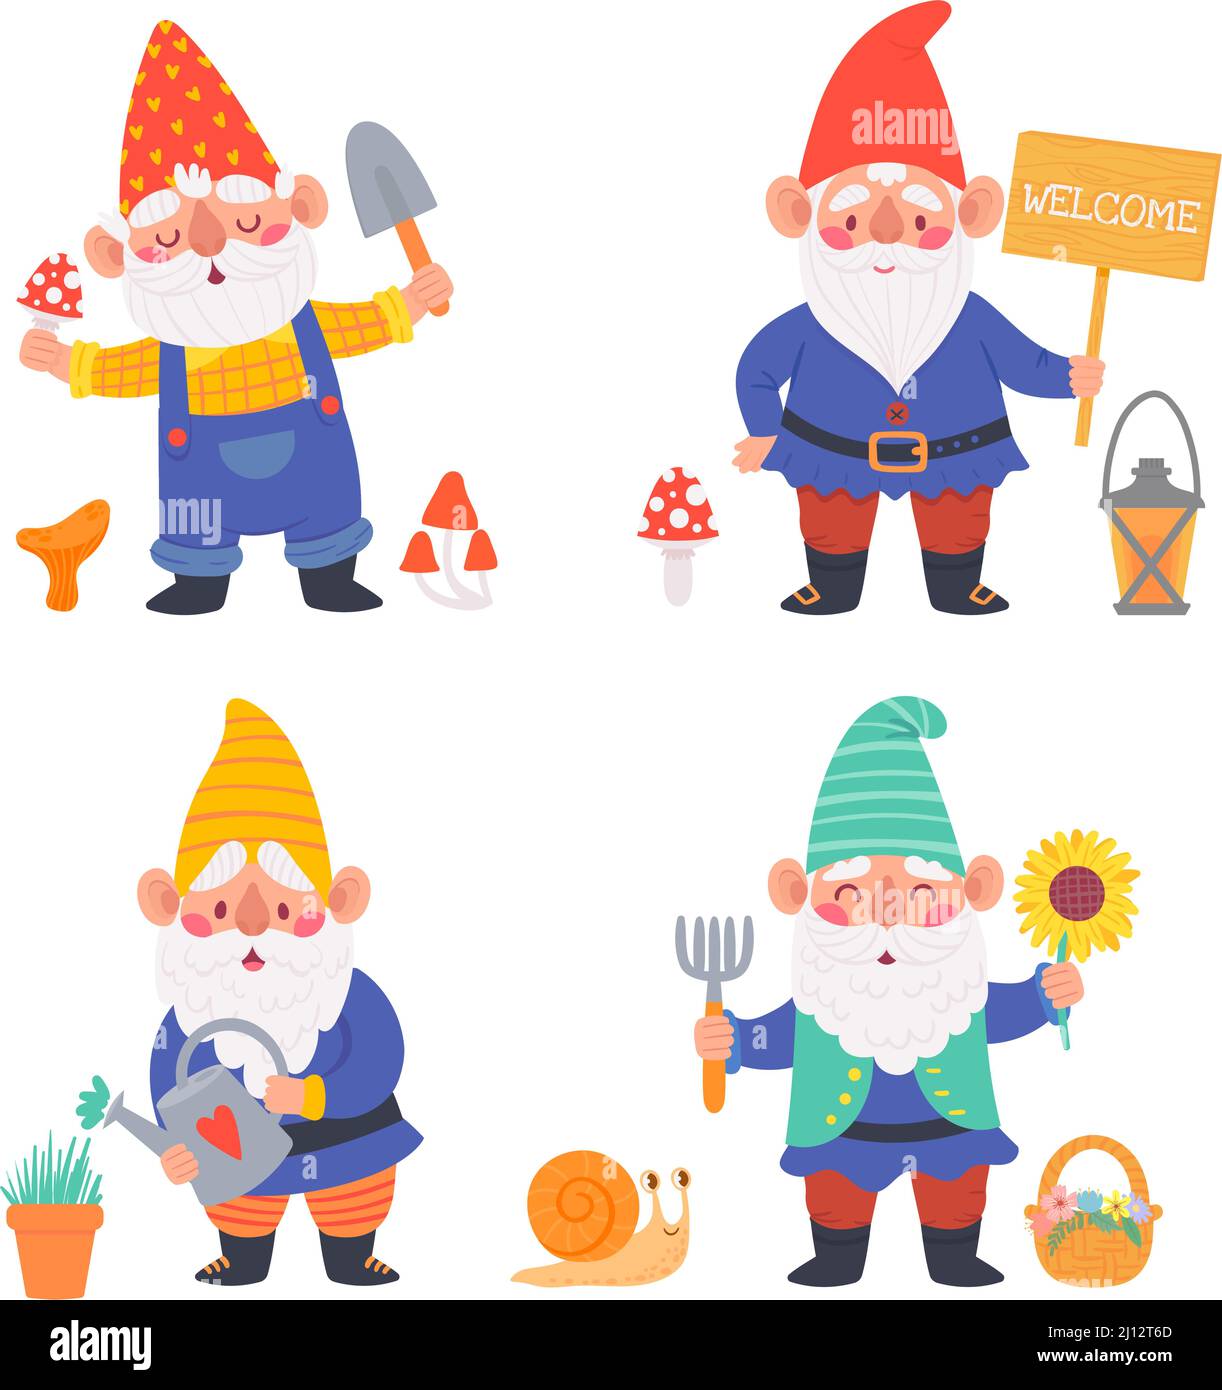 Cartoon gnome characters. Cute dwarfs holding gardening tool as watering can and digging shovel. Adorable characters Stock Vector